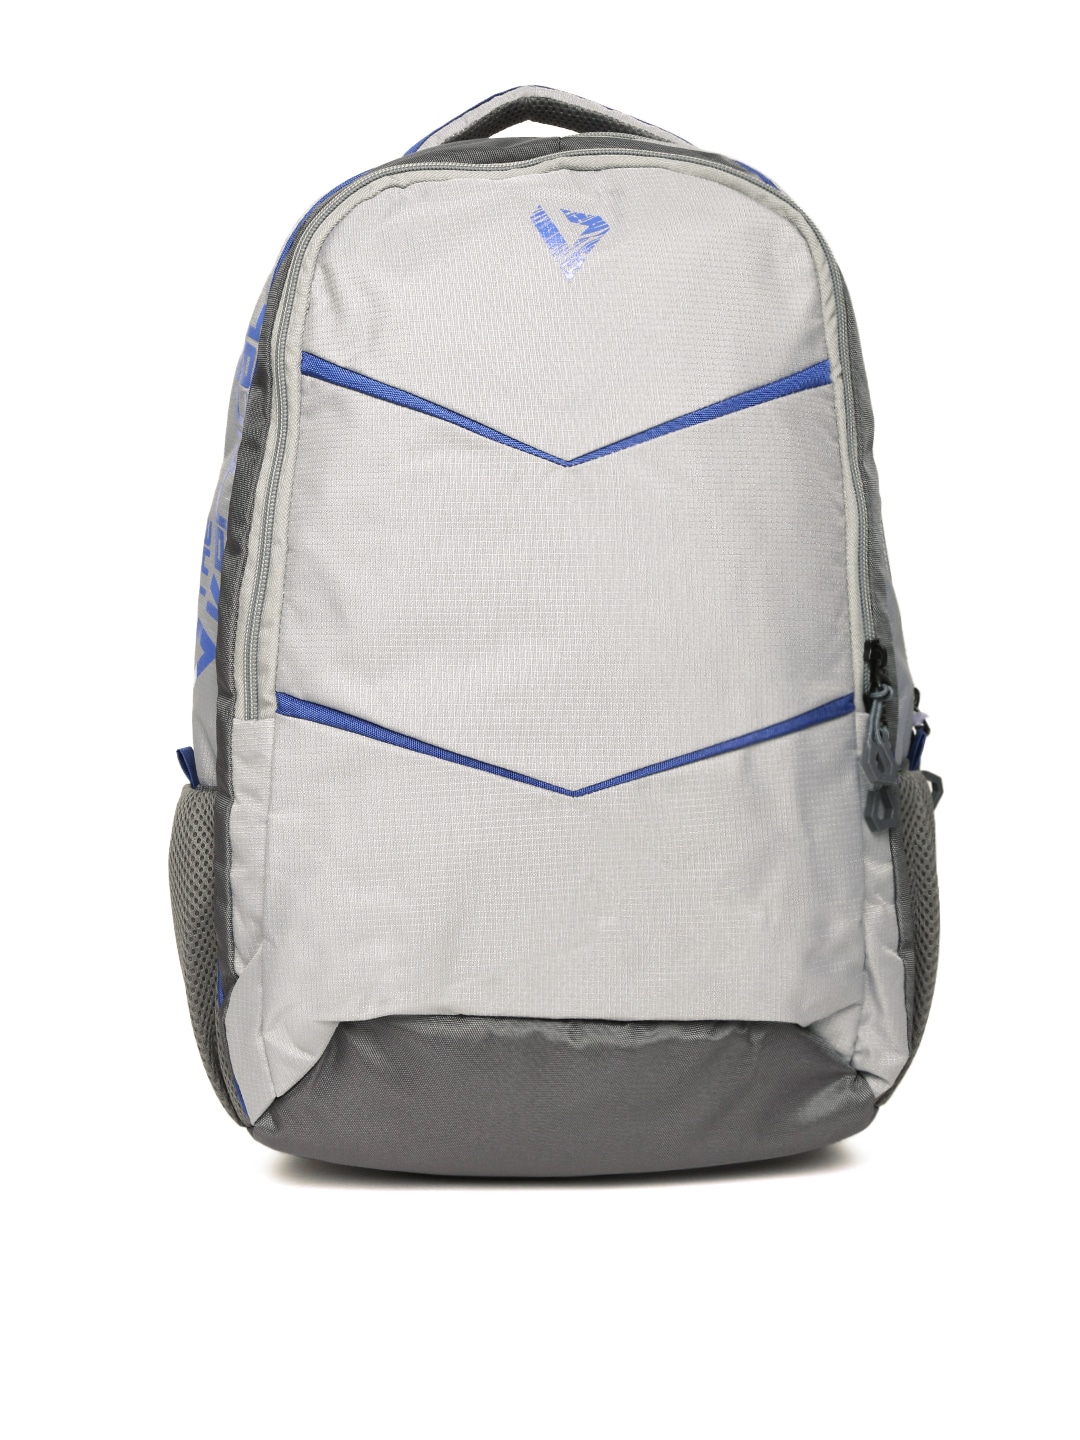 THe VerTicaL Unisex Grey Textured Backpack Price in India